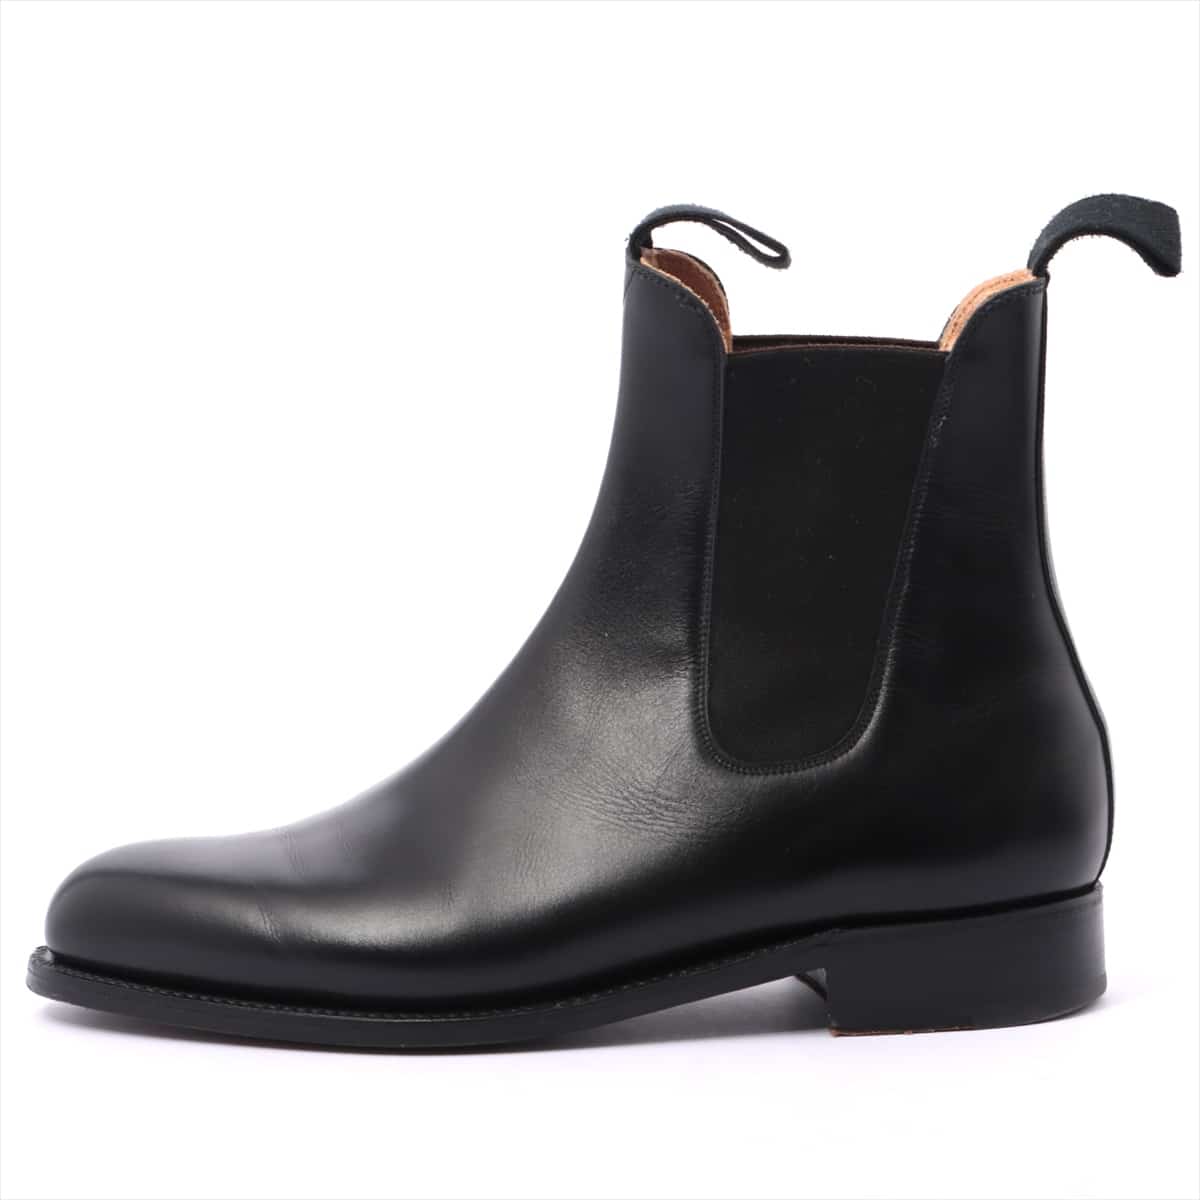 J. M. Weston Leather Side Gore Boots 6 Men's Black 705 Comes with a genuine shoe tree